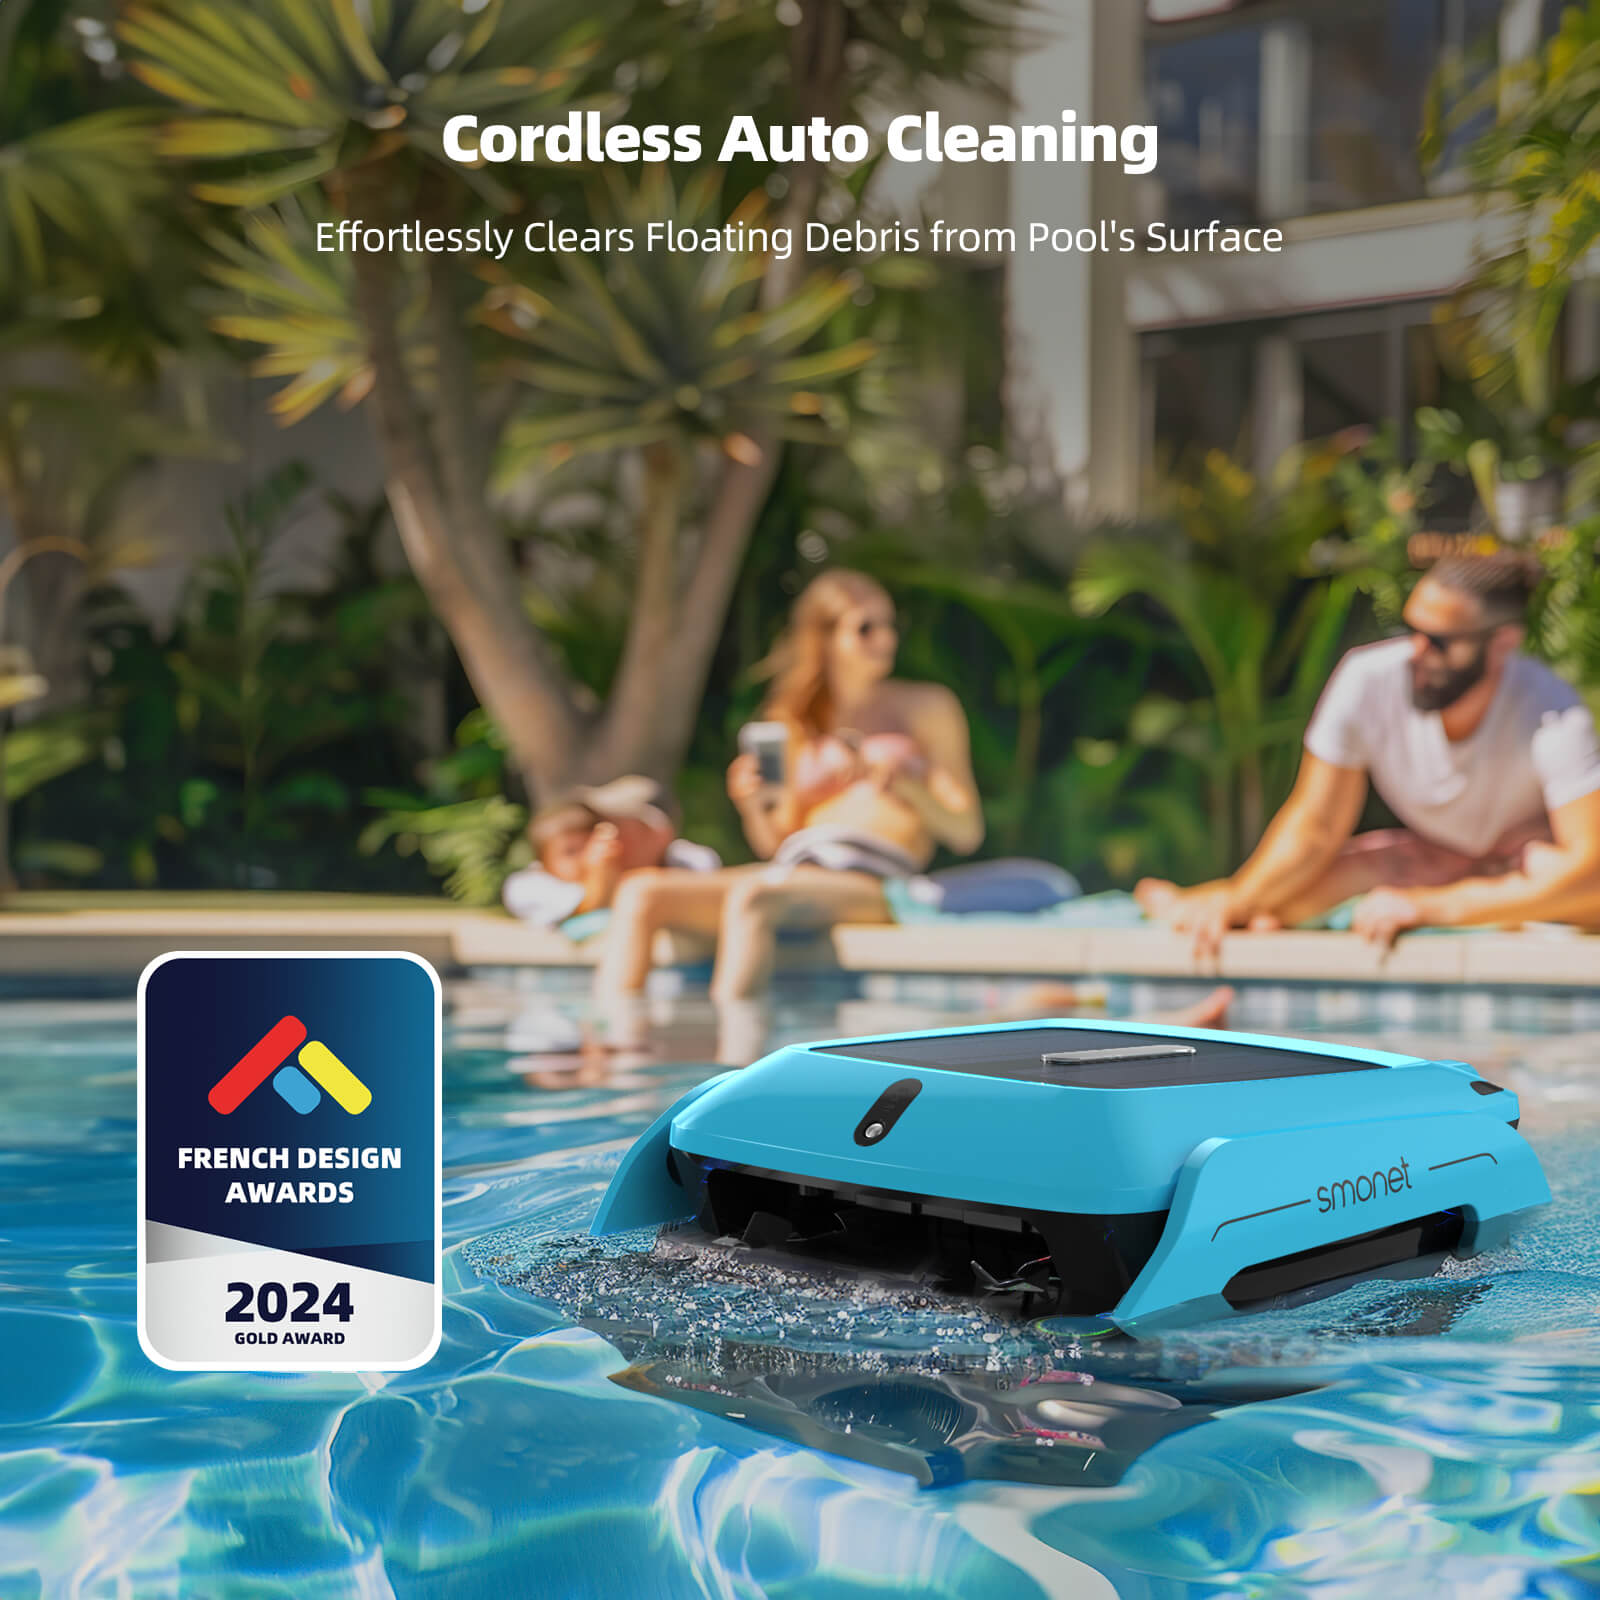 Smonet SR5 robotic pool skimmer-Cordless Auto Cleaning,Effortlessly Clears Floating Debris from Pool's Surface